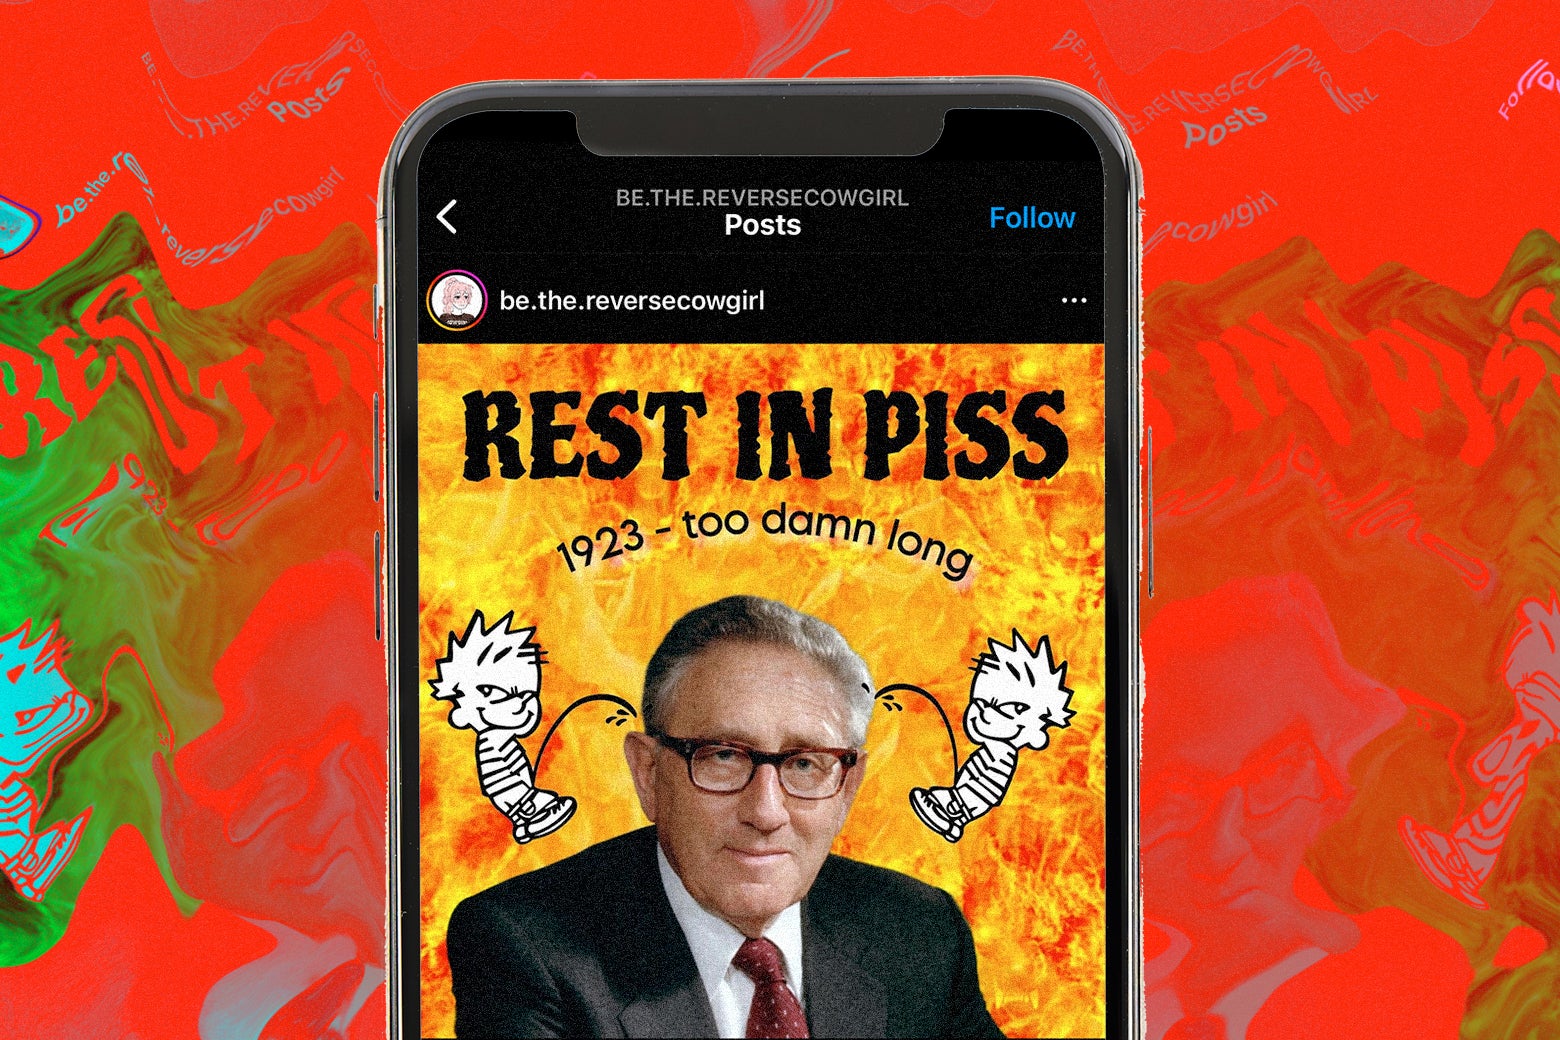 @be.the.reversecowgirl's Instagram post about Henry Kissinger, which says "Rest in Piss" and "1923-too damn long." In the background the post has been distorted and it's all red and green. 